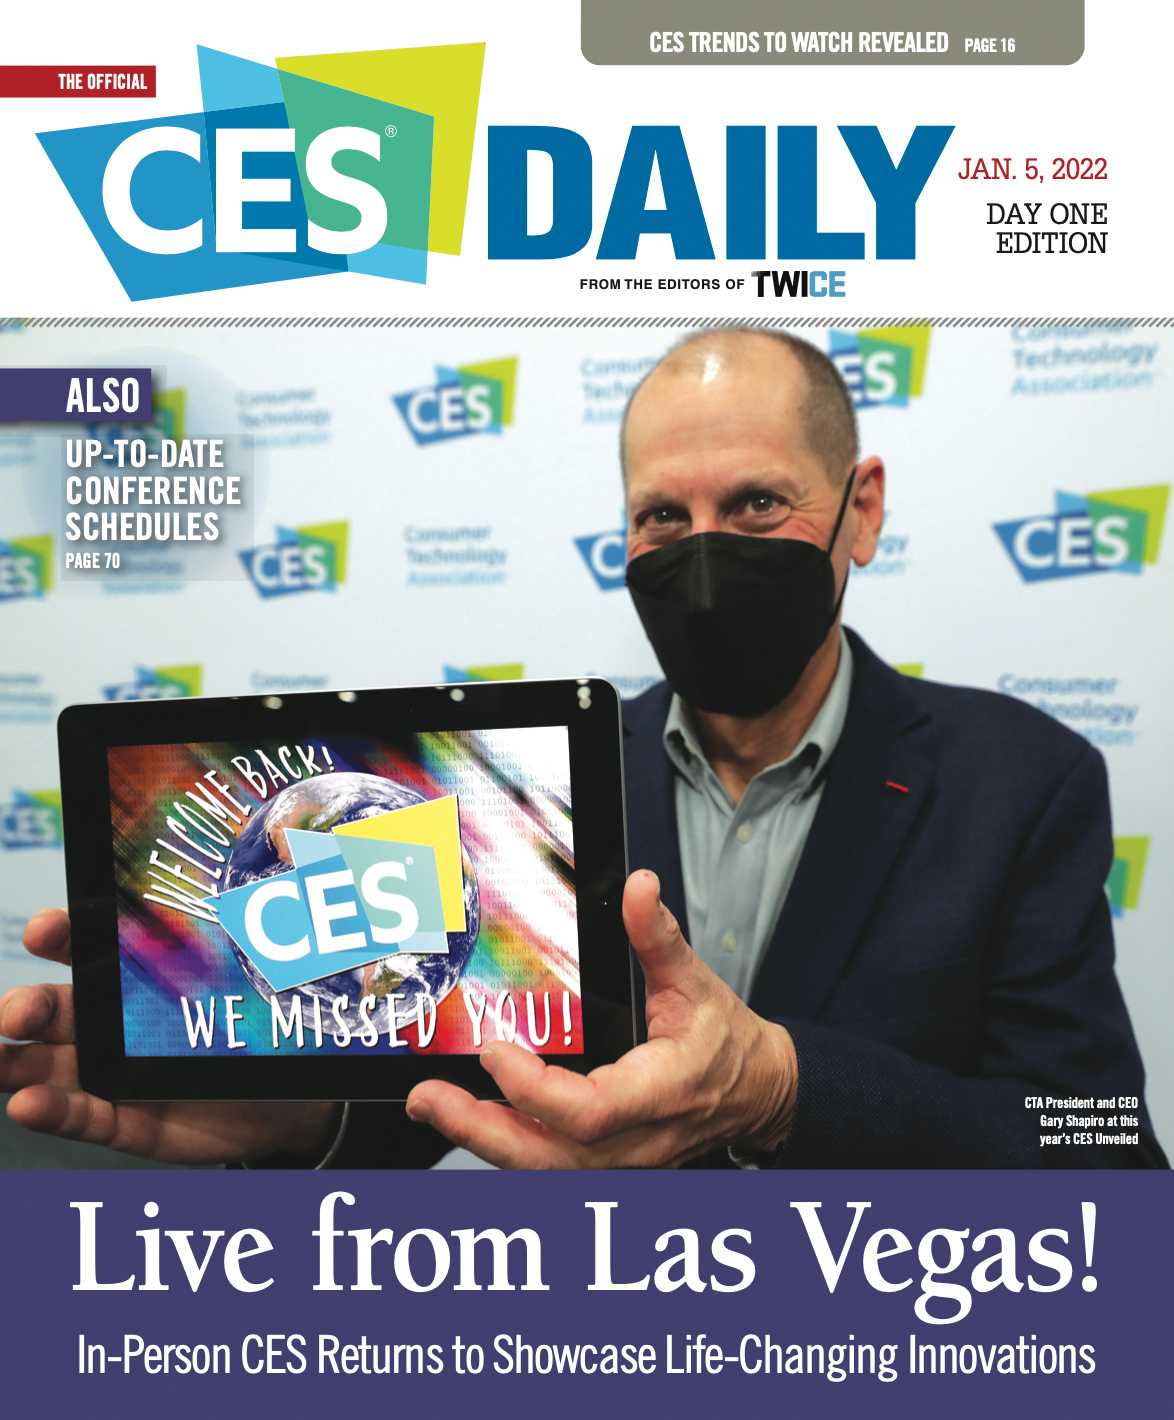 Read All 4 Editions of the 2022 CES Daily